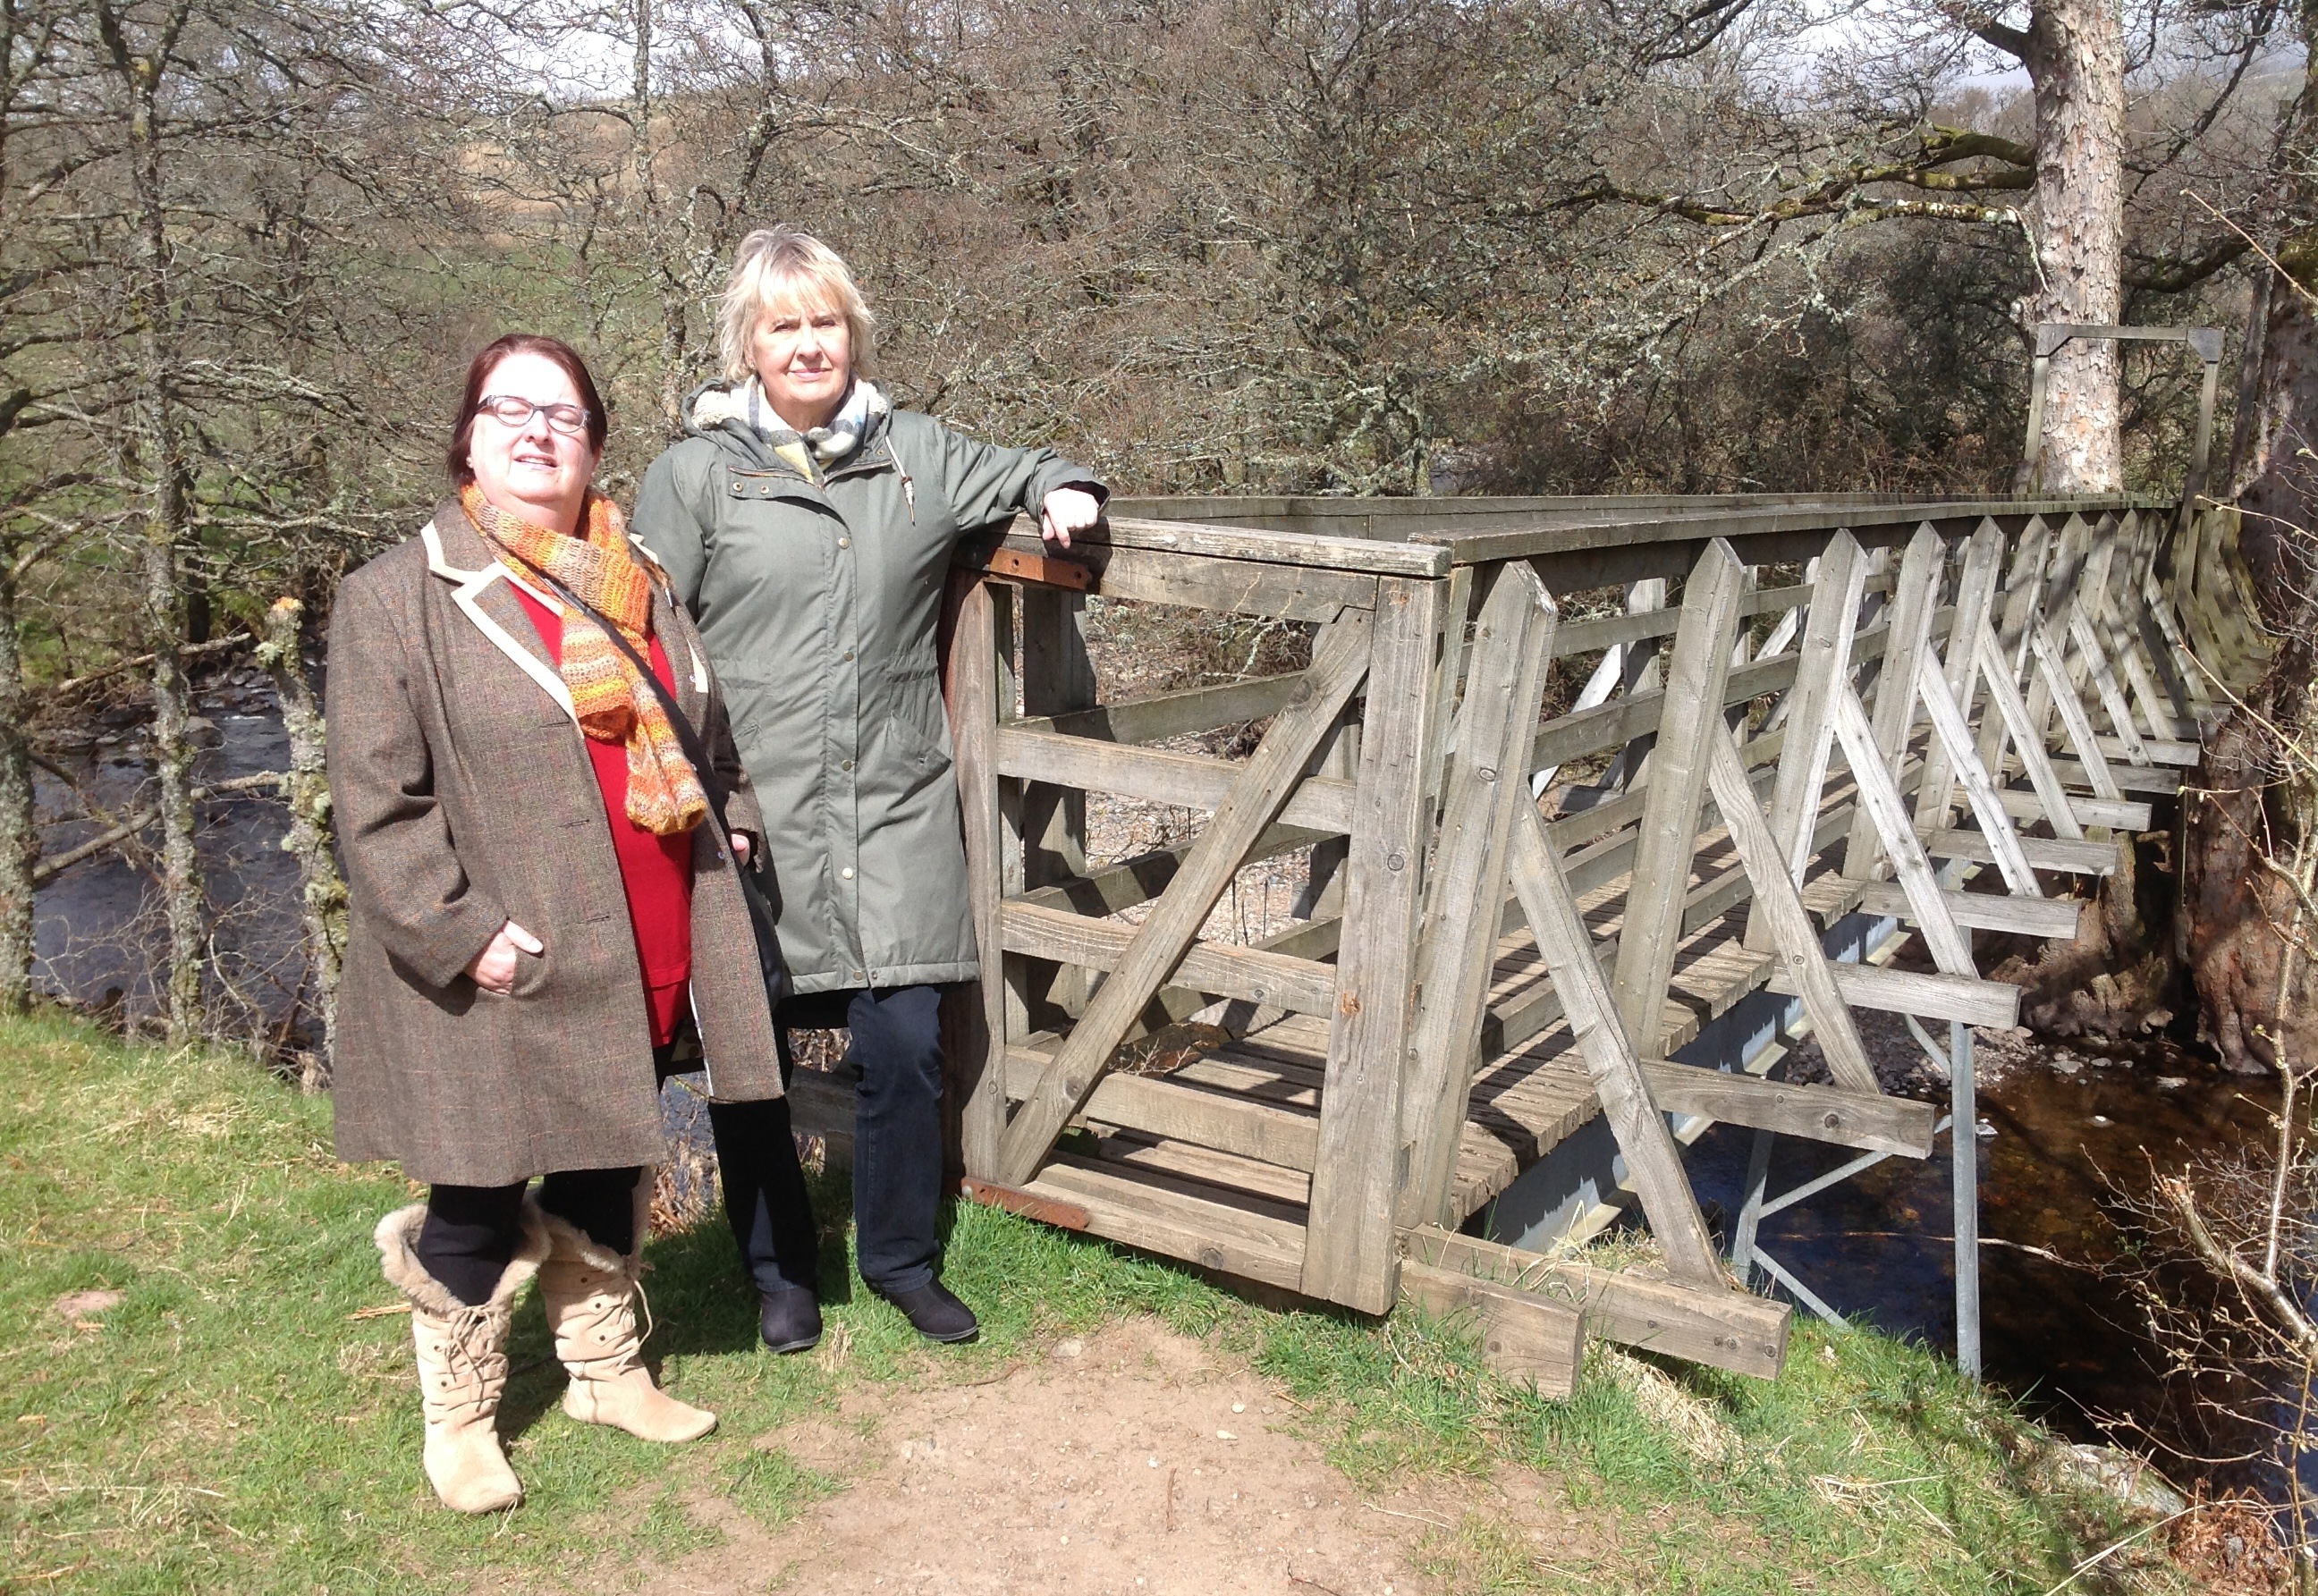 Comrie community council chair Sandra McRitchie and SNP candidate Roseanna Cunningham at the Shaky Bridge near Comrie.